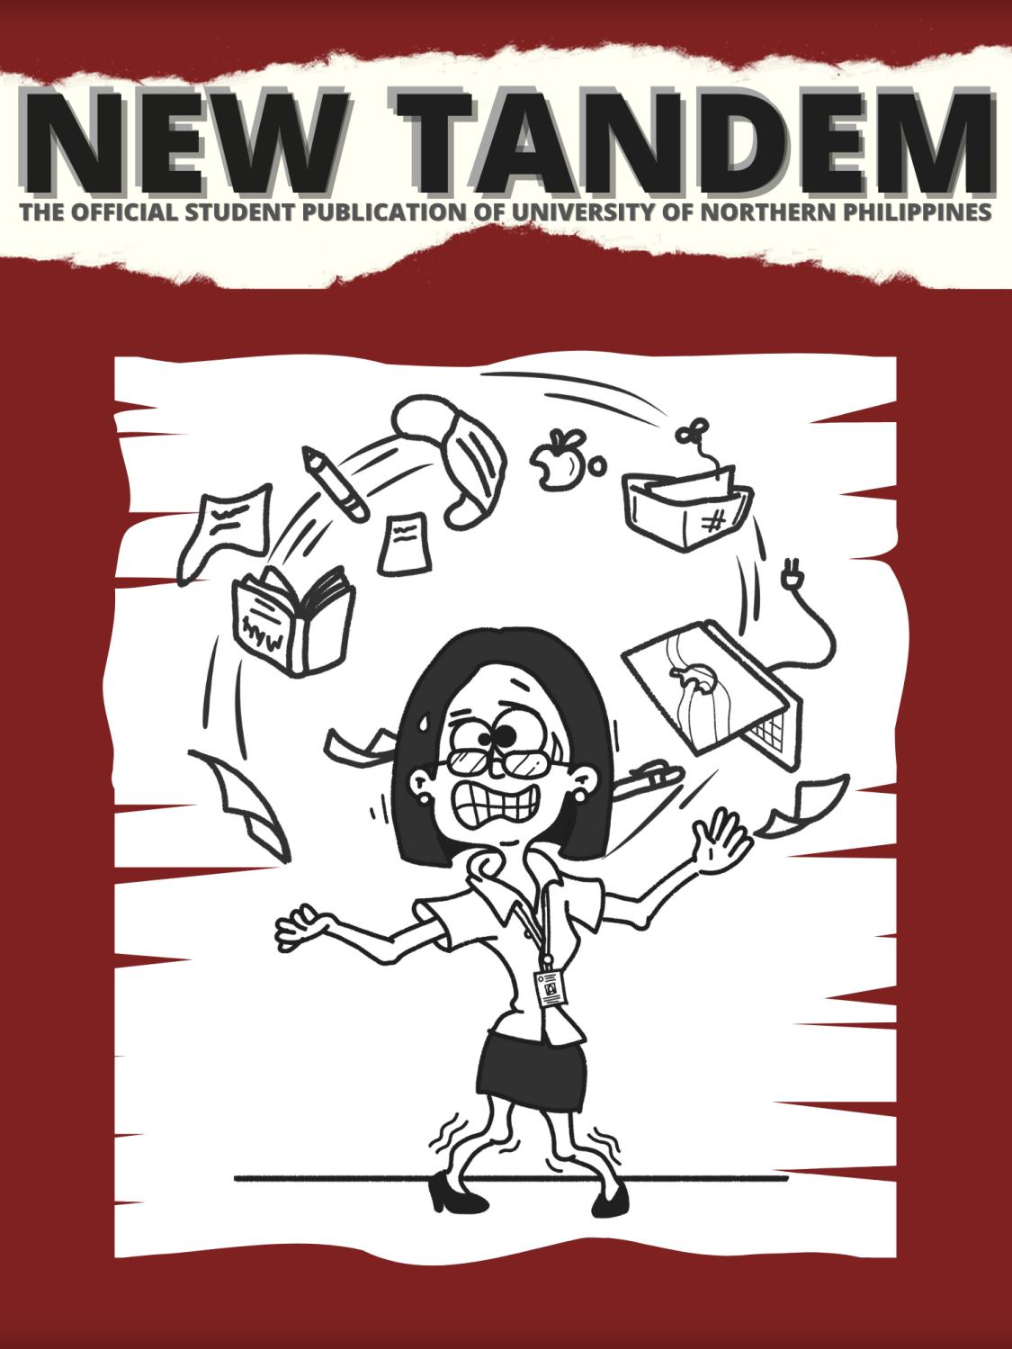 You are currently viewing The electronic magazine of New Tandem for the School Year 2019-2020.